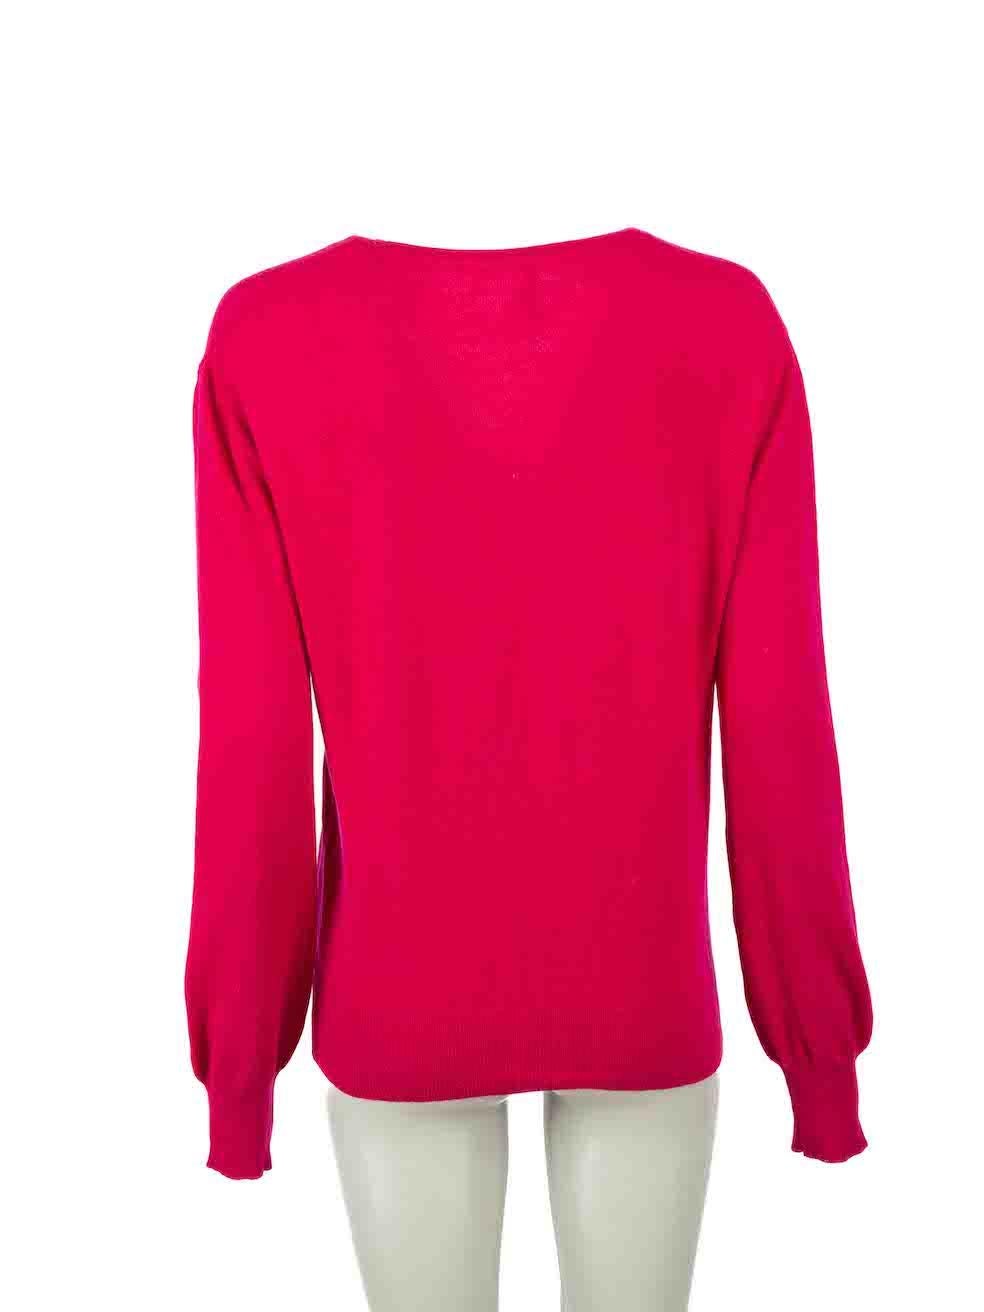 Louis Vuitton Fuchsia Cashmere Chain Lock Jumper Size S In Excellent Condition For Sale In London, GB